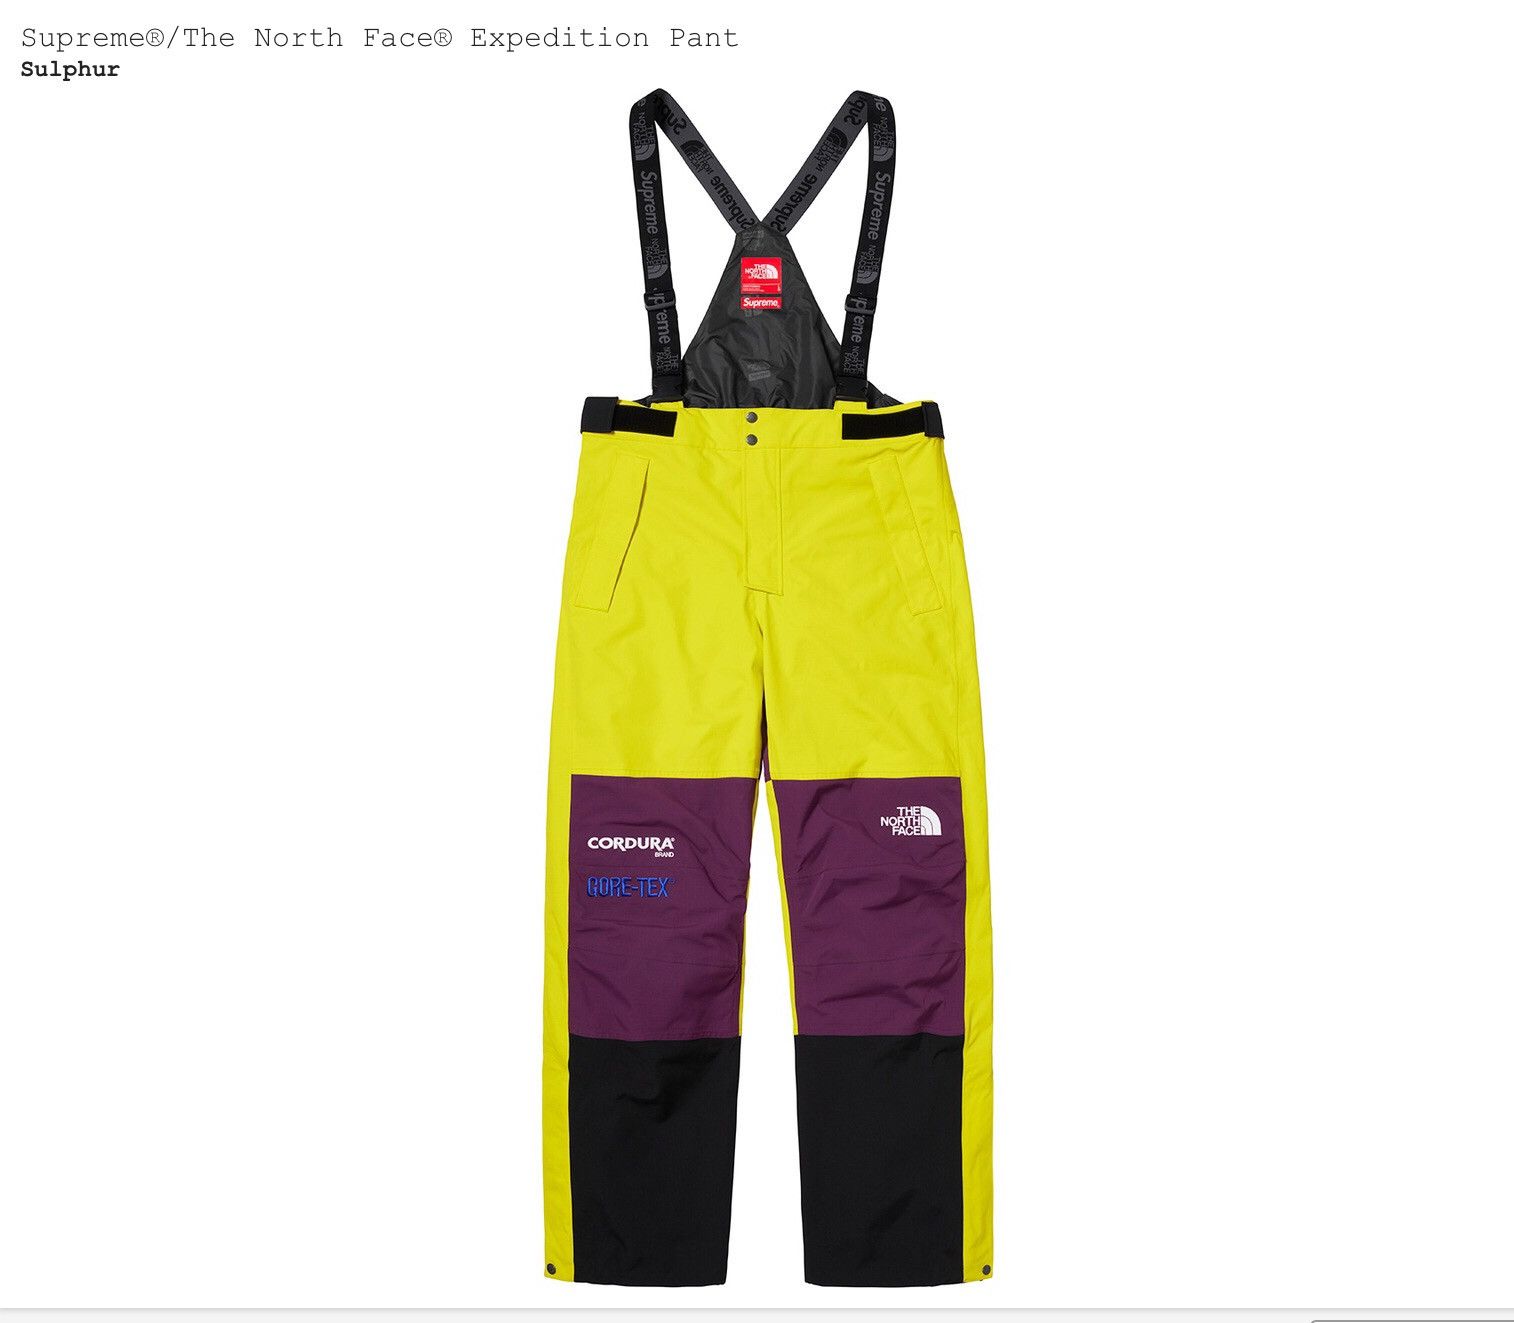 Supreme The North Face Expedition Pant | Grailed